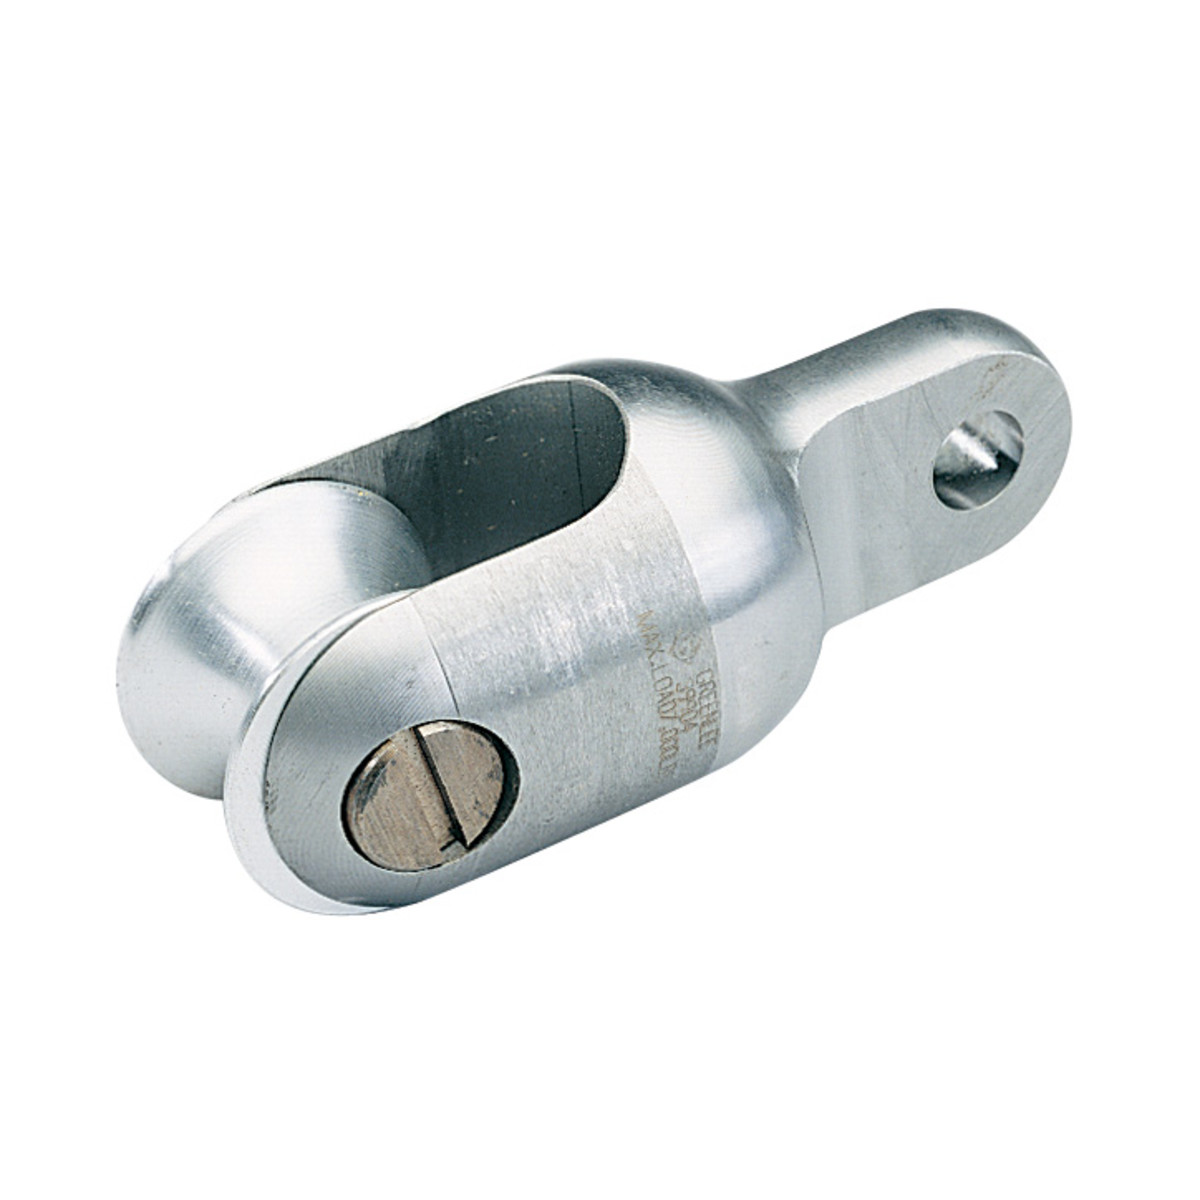 Rope-To-Swivel Connector 10,000 Pound Maximum Rated Capacity.  Rope-to-swivel connectors connect the cable pulling rope, up to 1